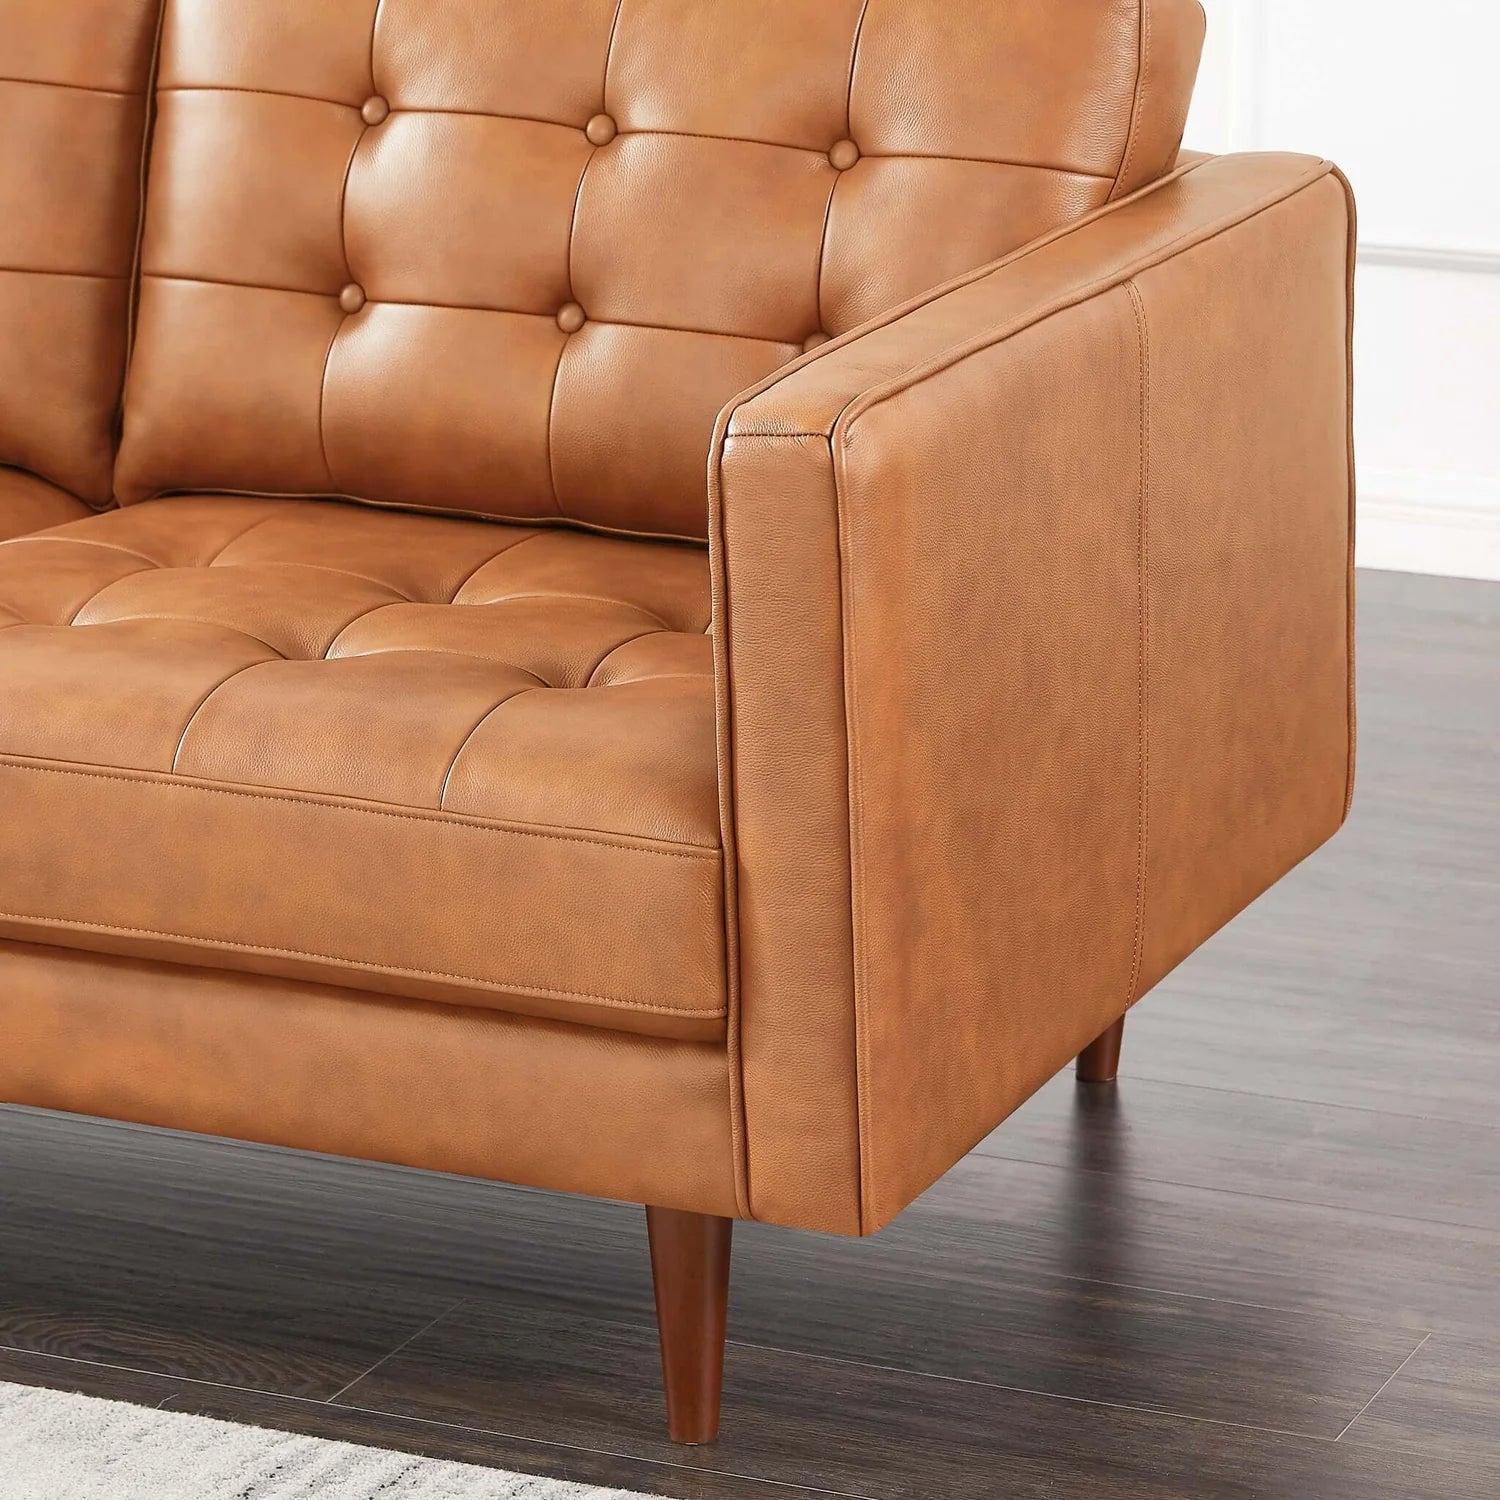 Lucco Genuine Leather Sectional (Left Facing)